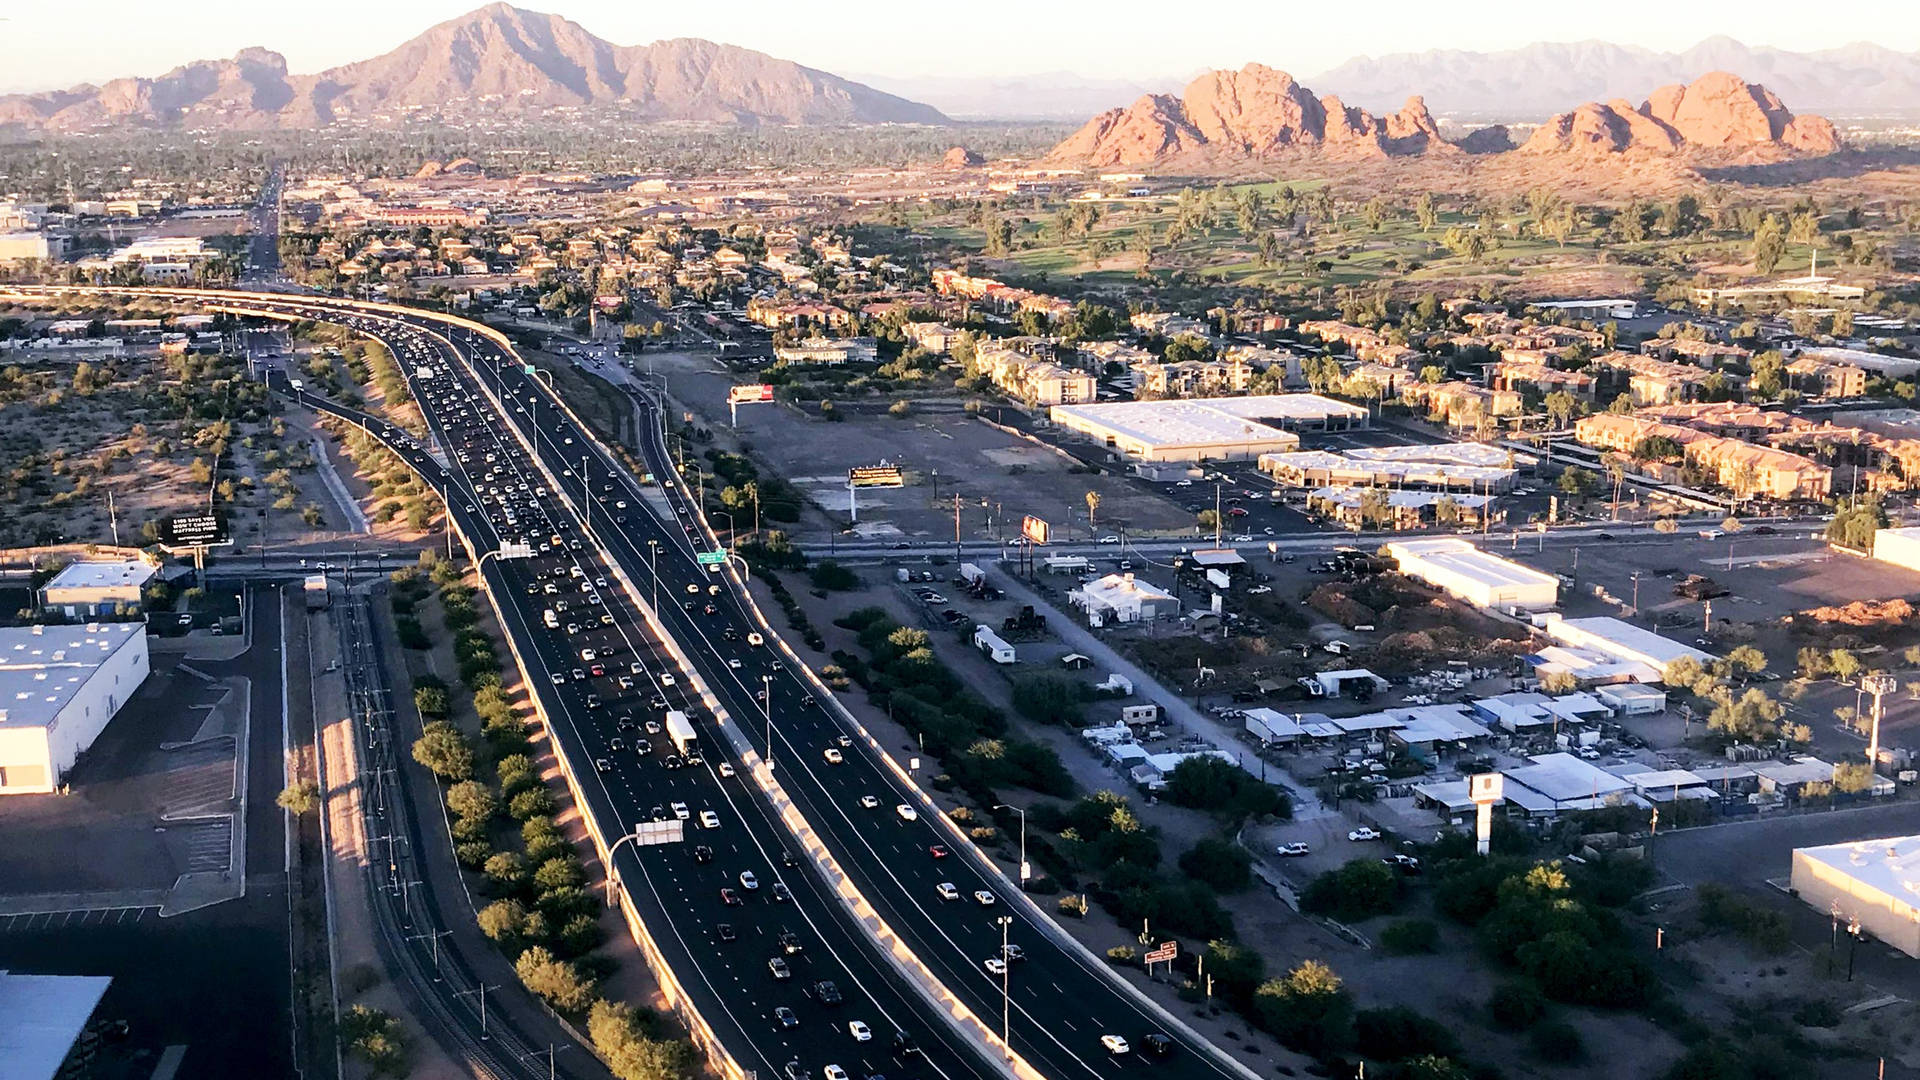 The Highways And Mountains Of Chandler Wallpaper